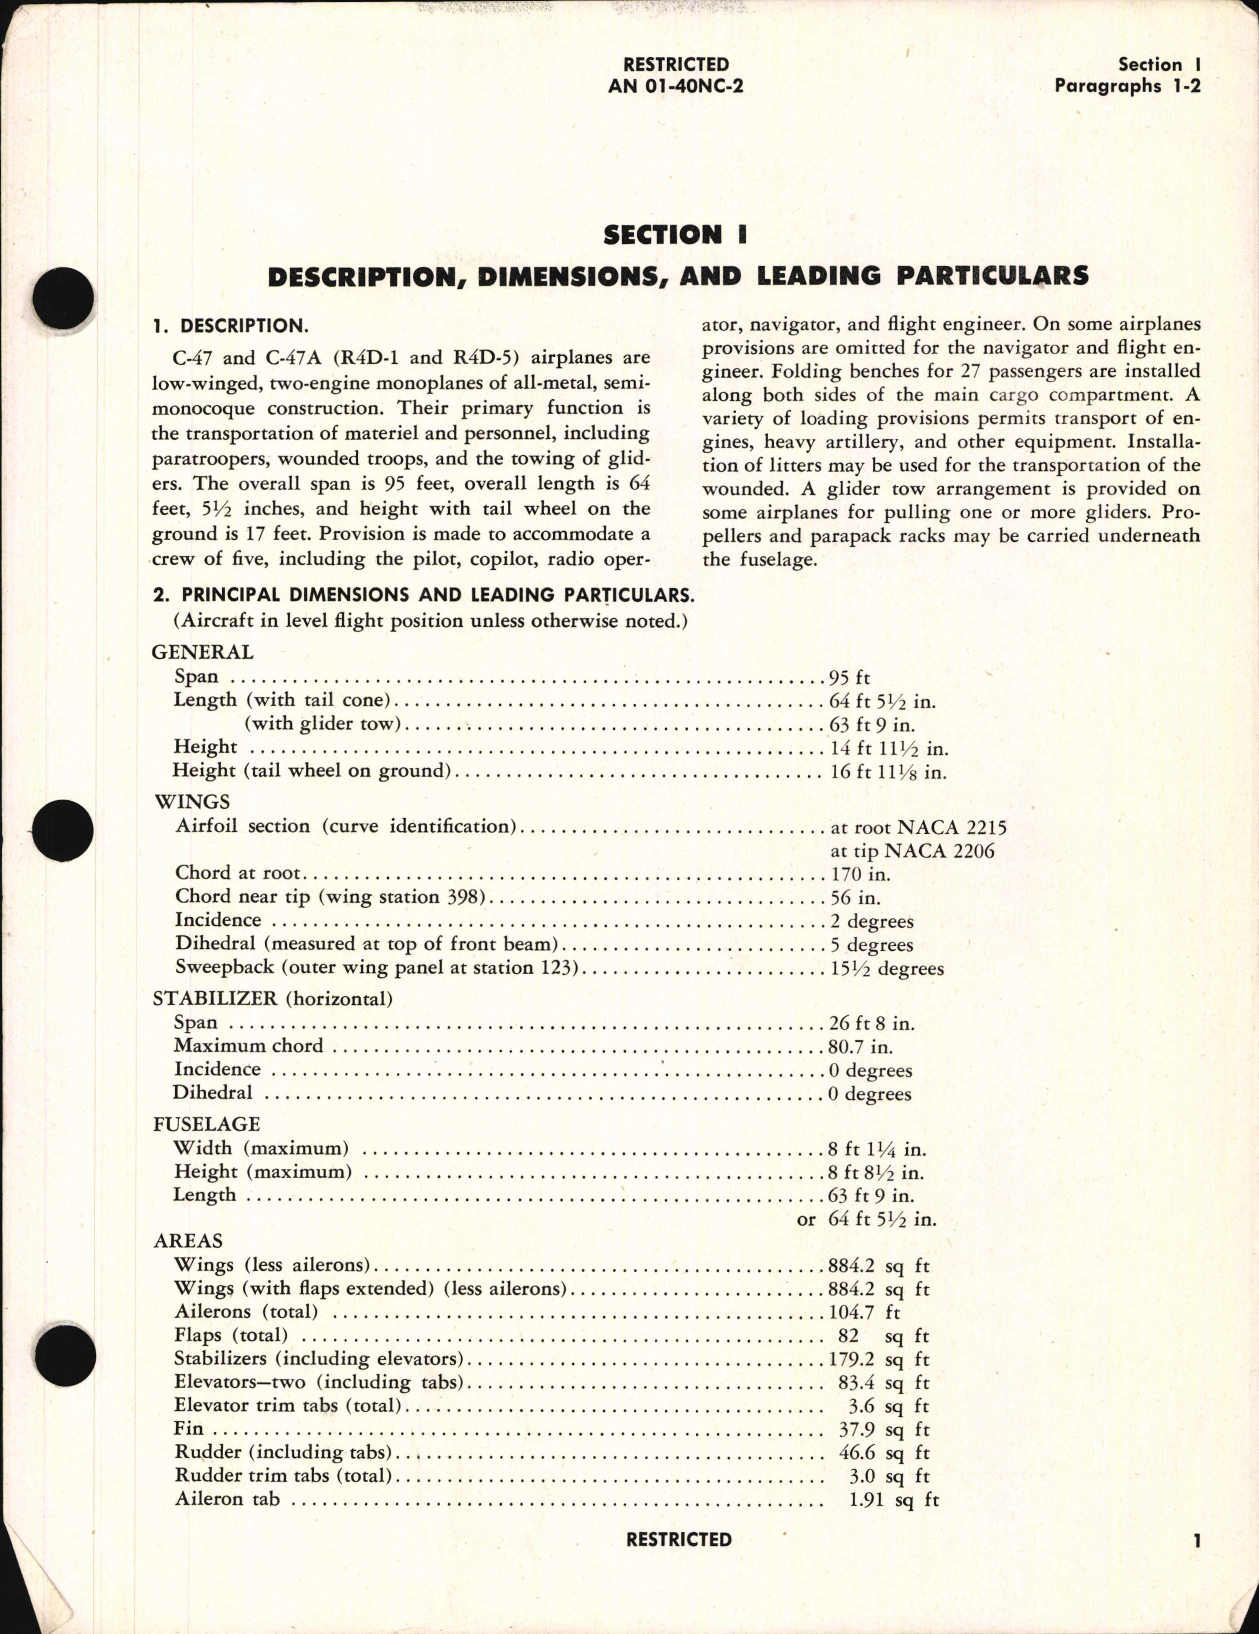 Sample page 7 from AirCorps Library document: Erection and Maintenance Instructions for C-47, C-47A, R4D-1, and R4D-5